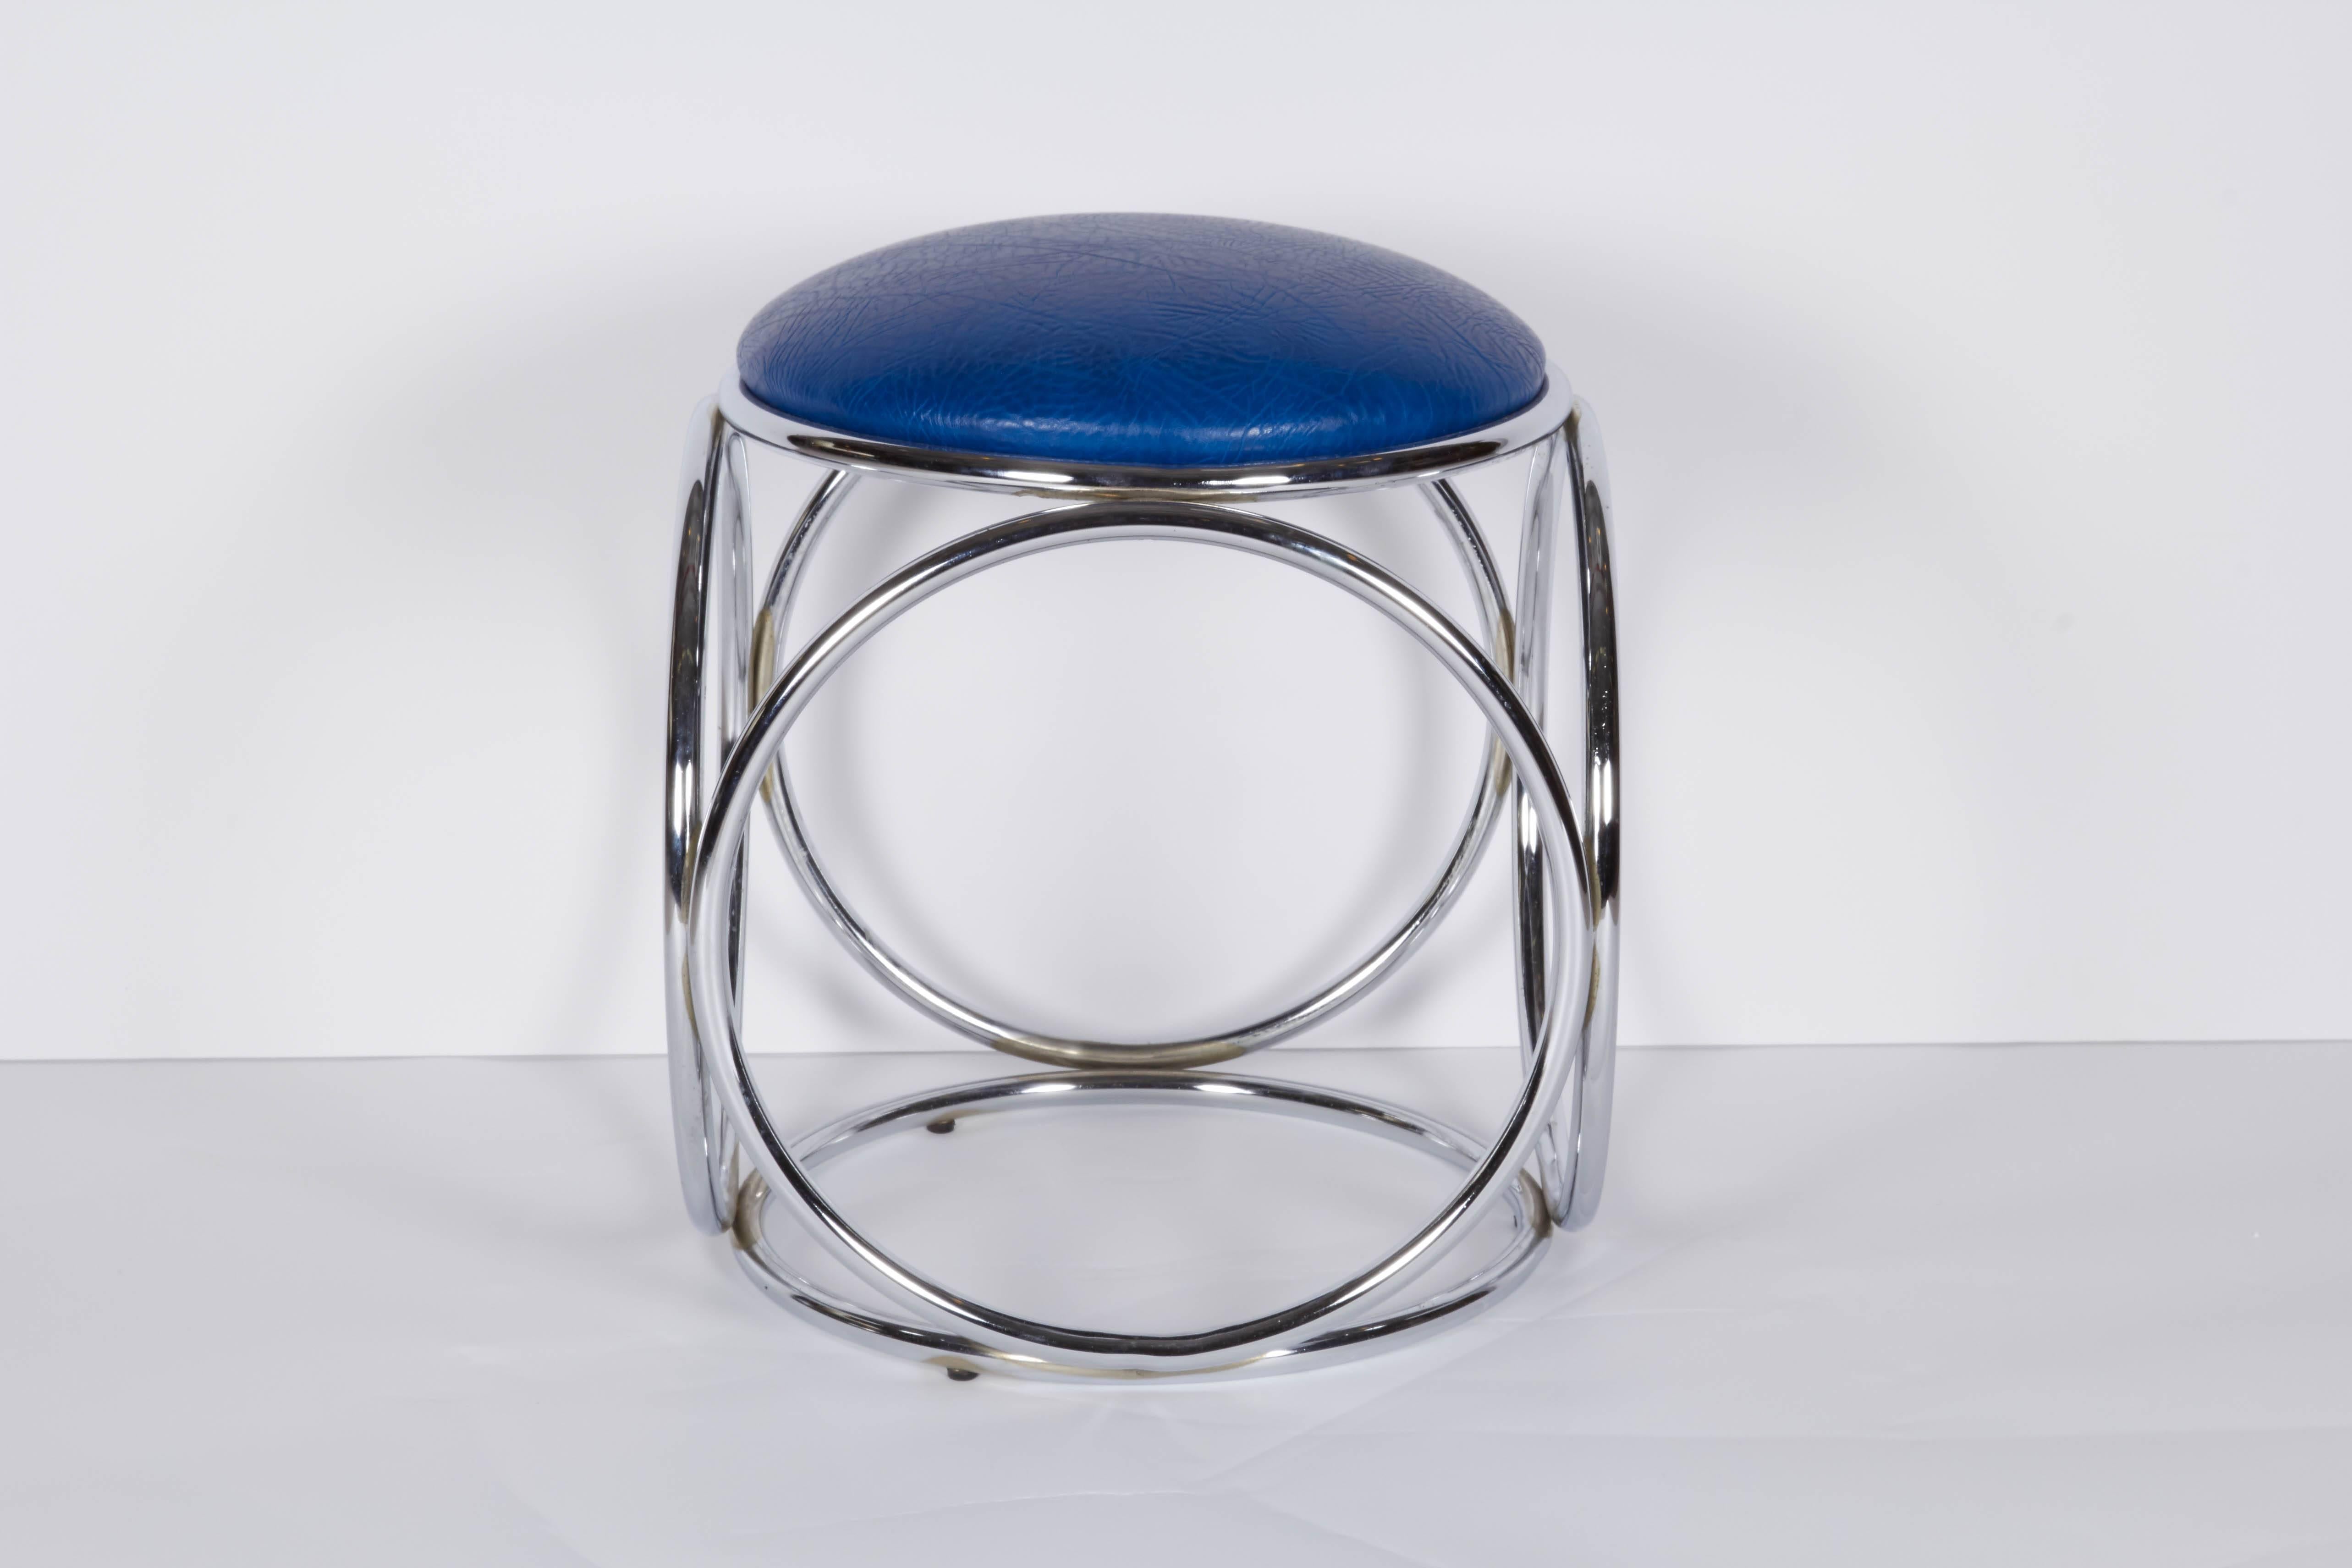 This circa 1970s stool, comes with round seat, upholstered in textured blue leather, on a chrome base, comprised of tubular rings. The stool remains in very good vintage condition, consistent with age; seat newly reupholstered.